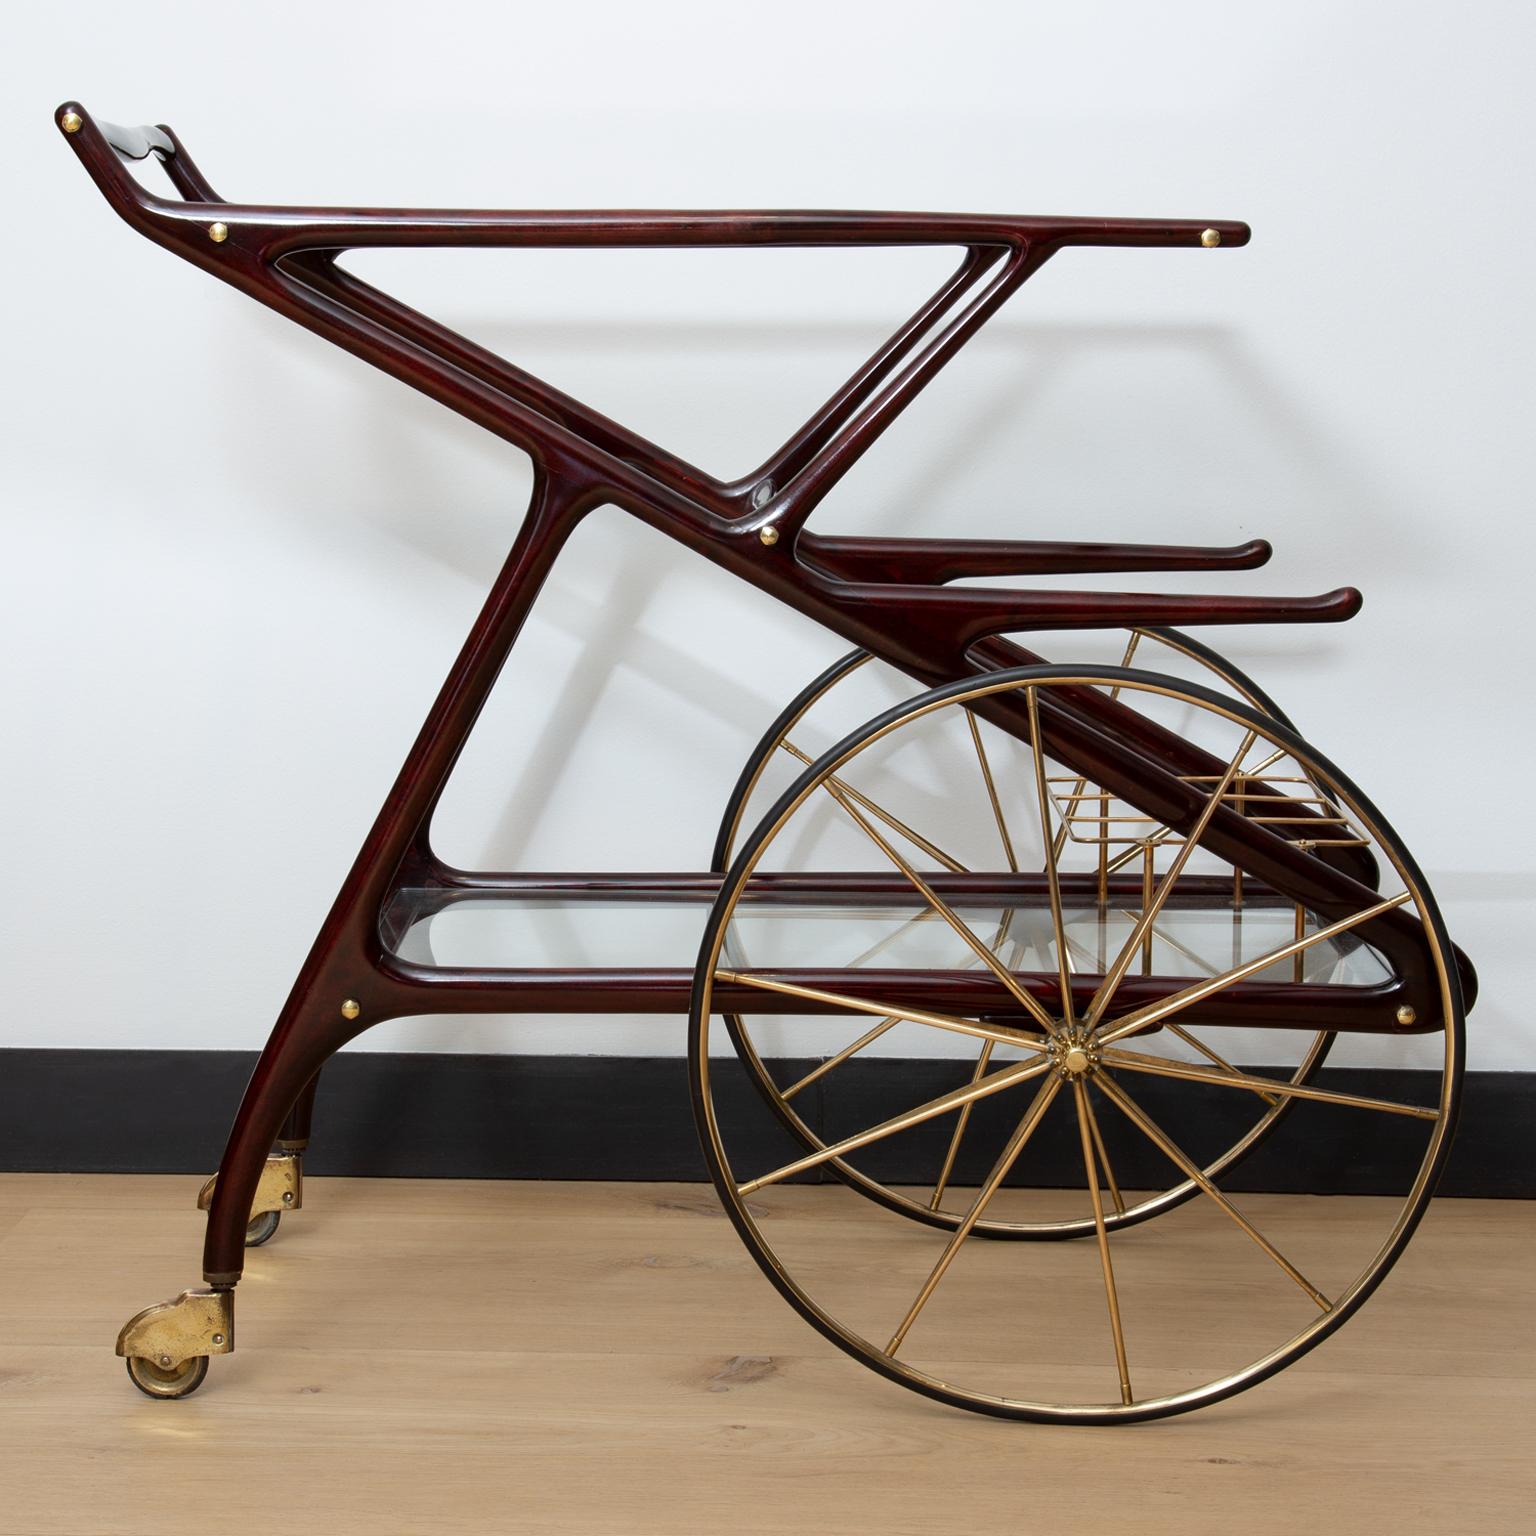 A large proportioned sculptural wood, brass and glass bar trolley designed by Cesare Lacca.